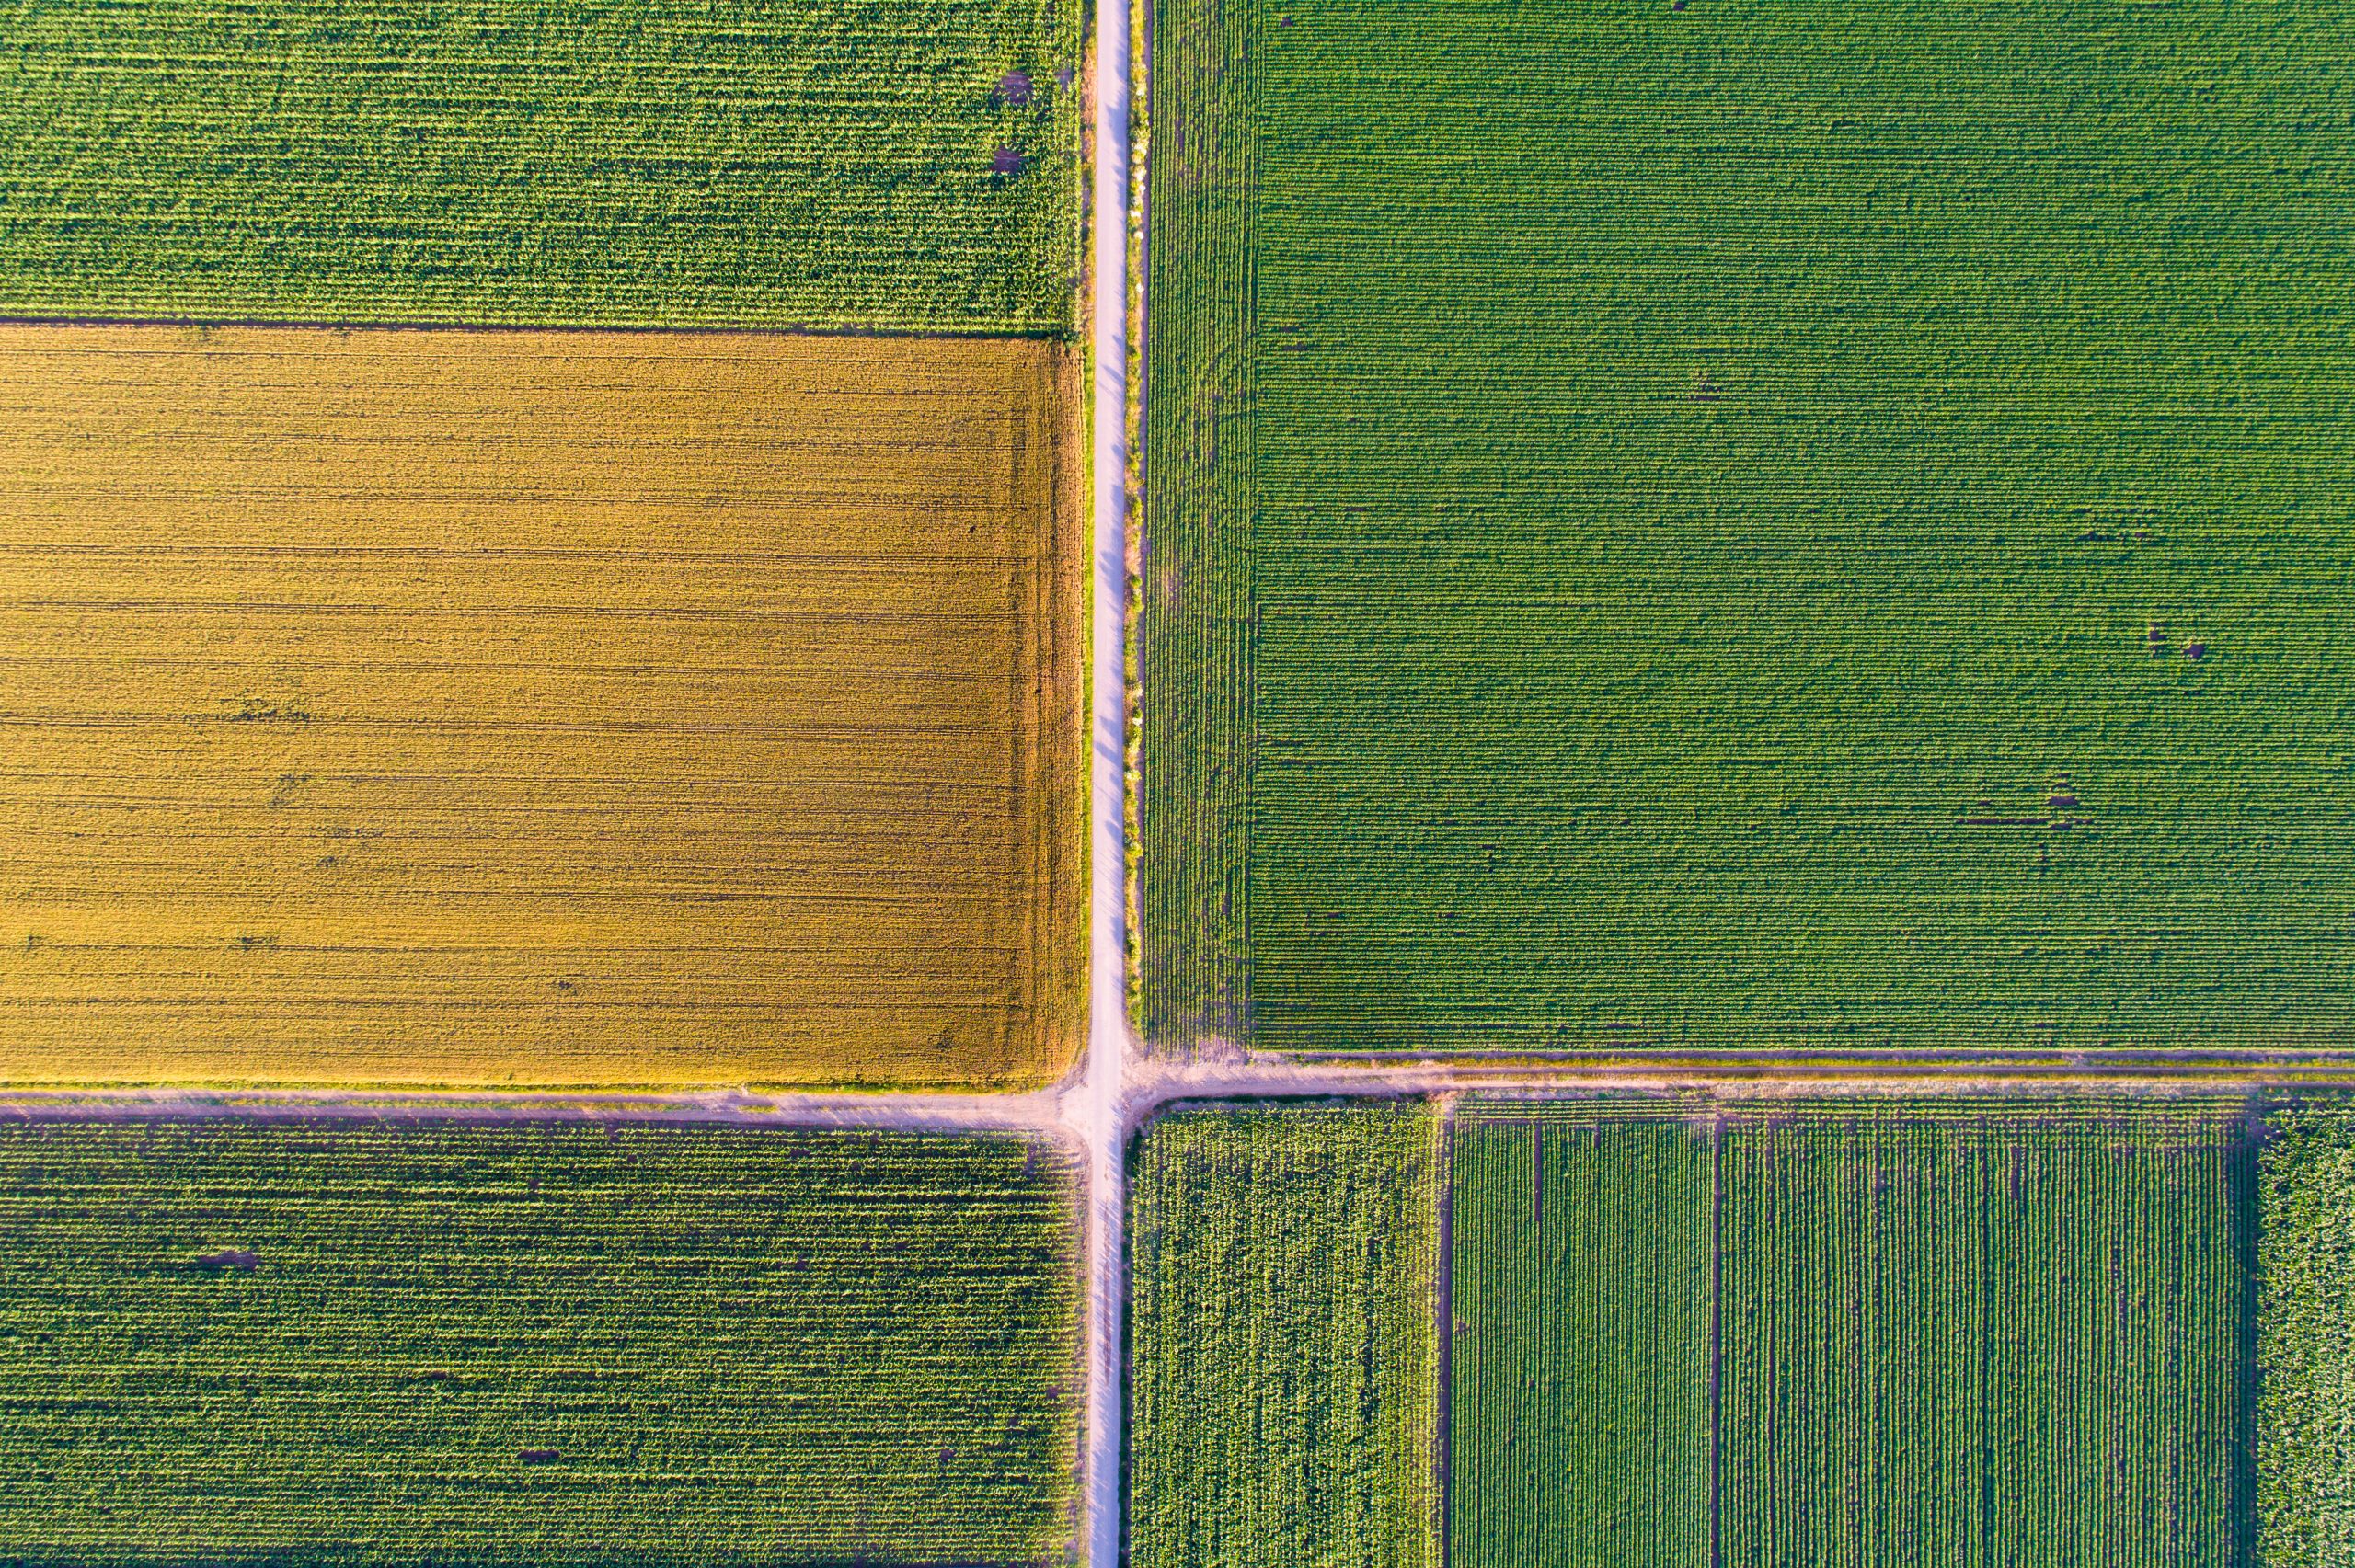 Global agriculture at a critical crossroads. Photo: Budimir Jevtic